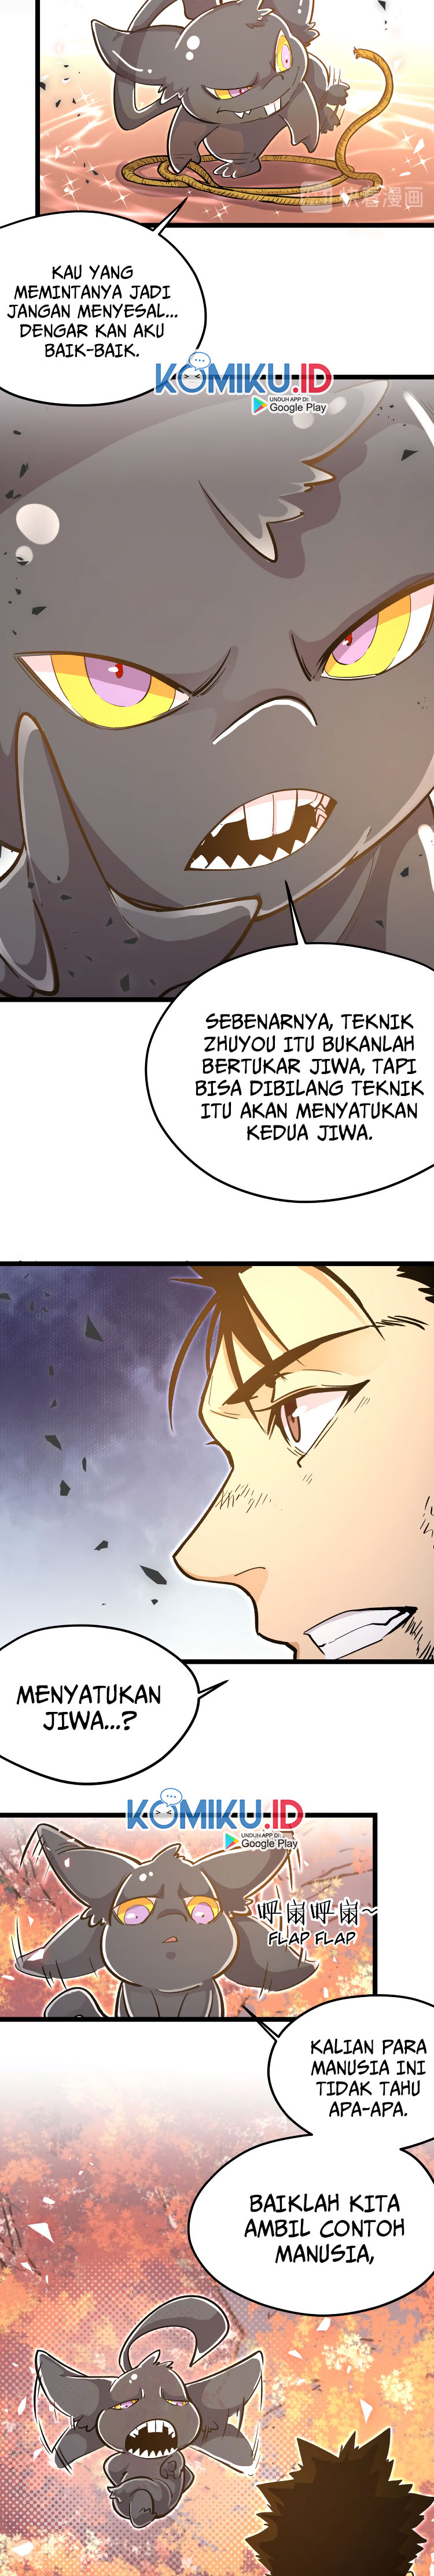 Black Abyss at Dawn Chapter 20 5